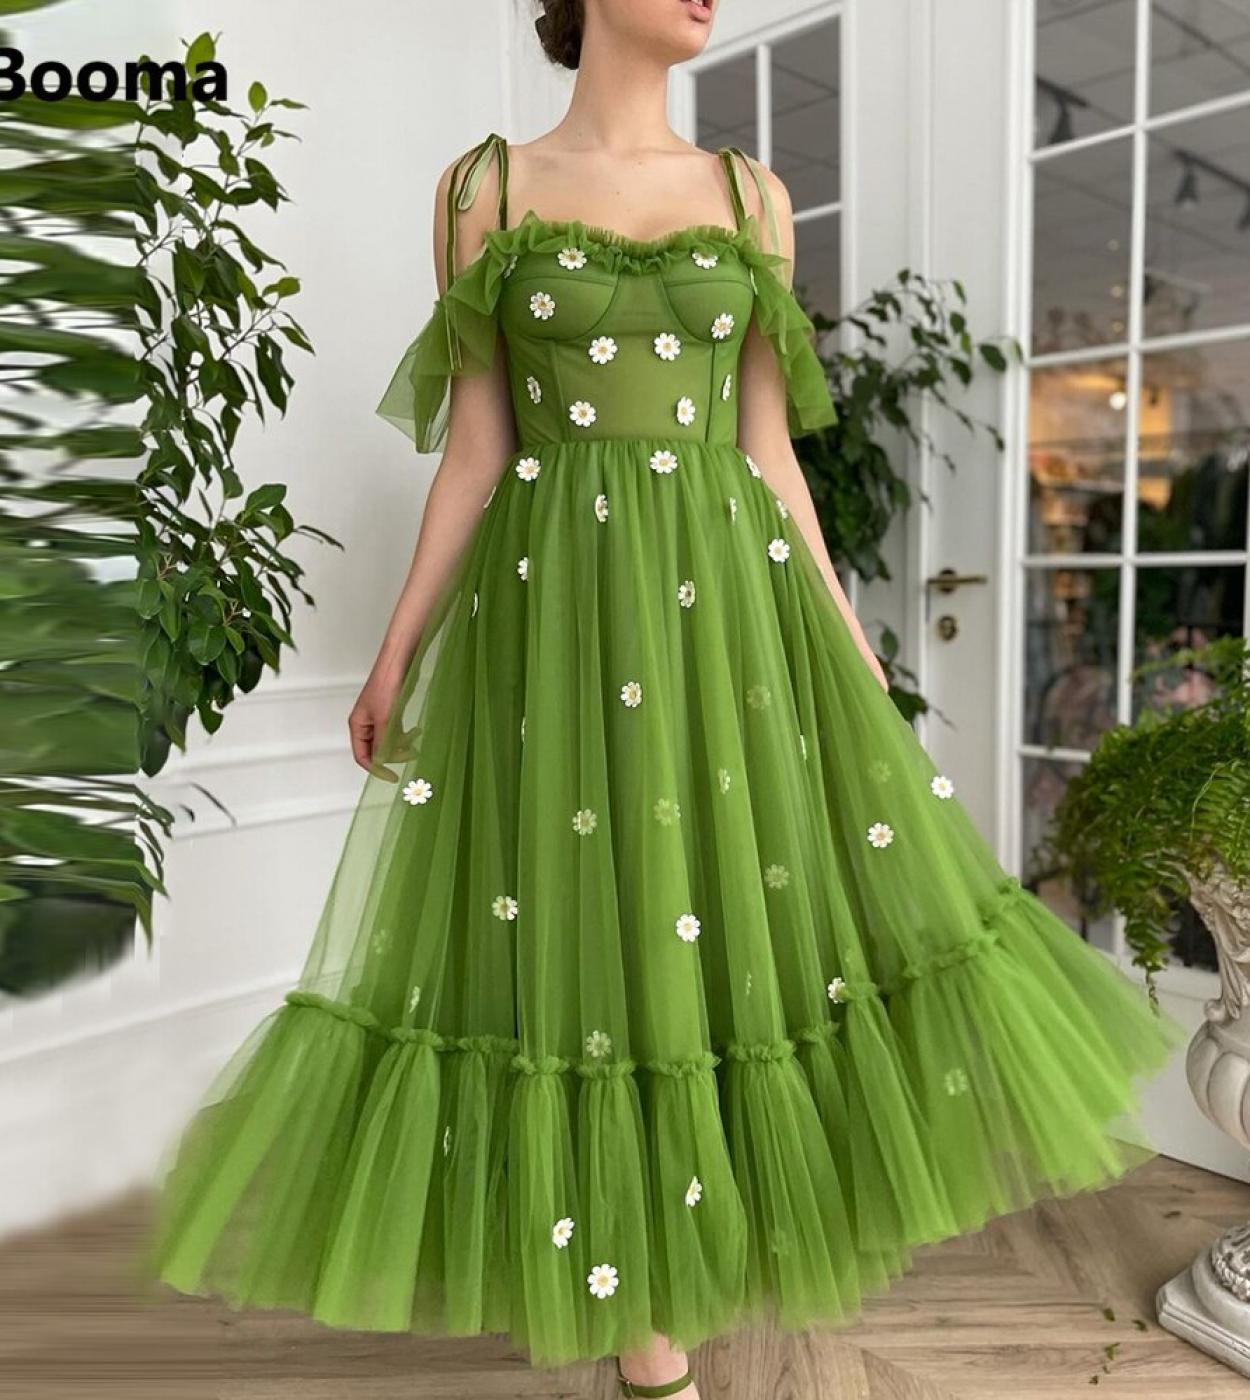 Booma Green Off The Shoulder Prom Dresses Spaghetti Straps Ruffles Tealength Prom Gowns Daisy Flowers Wedding Party Dres